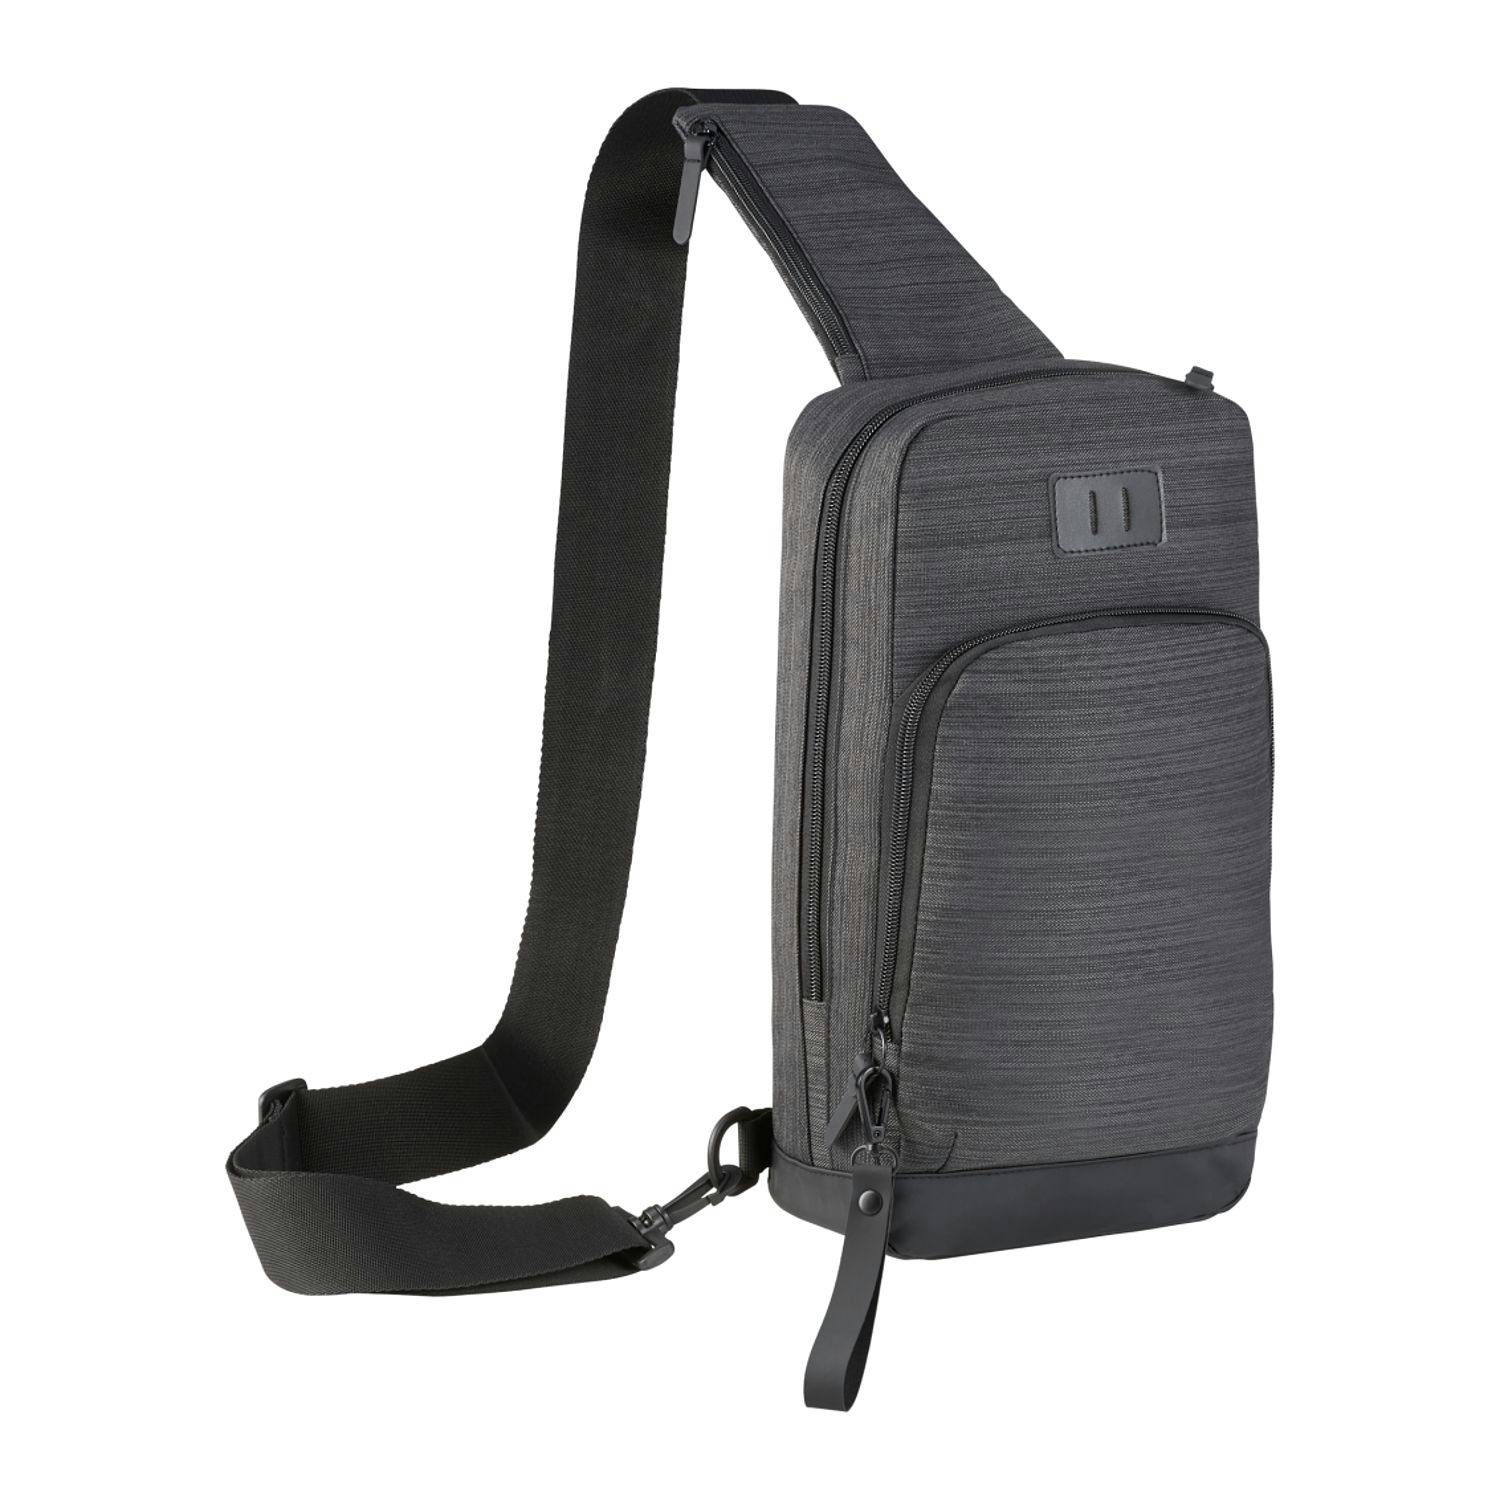 NBN Whitby Sling w/ USB Port - additional Image 2